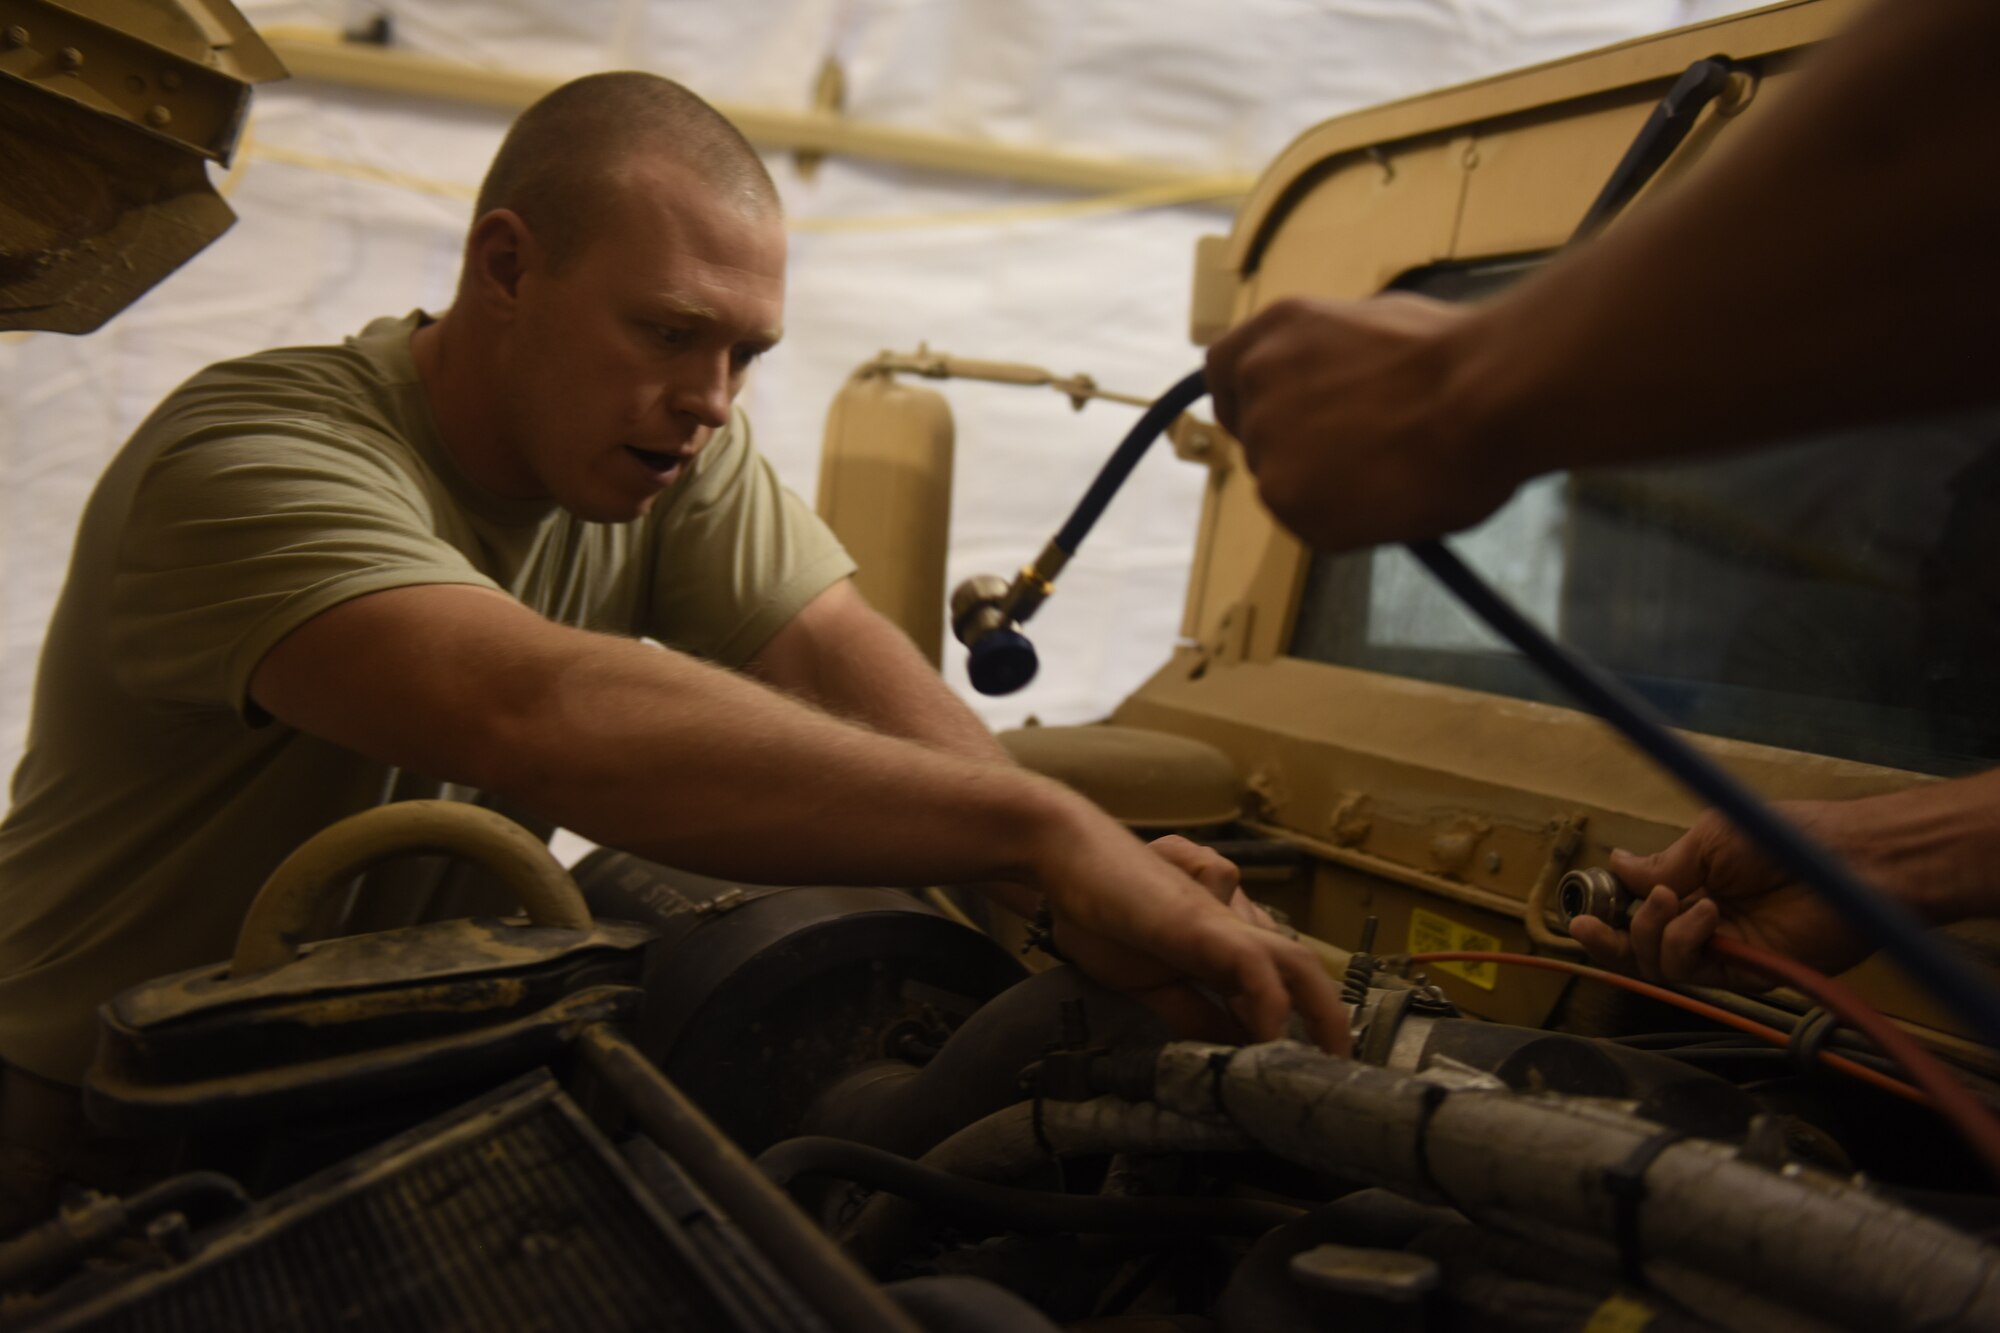 U.S. Air Force Staff Sgts. Shawn Benton, an aerospace ground equipment craftsman, and. Adam Martin, a fire truck maintenance specialist, both deployed in support of Combined Joint Task Force – Operation Inherent Resolve and assigned to the 370th Air Expeditionary Advisory Group, Detachment 1, work together to charge the air conditioning system of a Humvee at Qayyarah West Airfield, Iraq, July 2, 2017. Benton often works outside of his scope to assist with vehicle maintenance and facility sustainment at the Air Force compound at Qayyarah West CJTF-OIR is the global Coalition to defeat ISIS in Iraq and Syria. (U.S. Air Force photo by Tech. Sgt. Jonathan Hehnly)